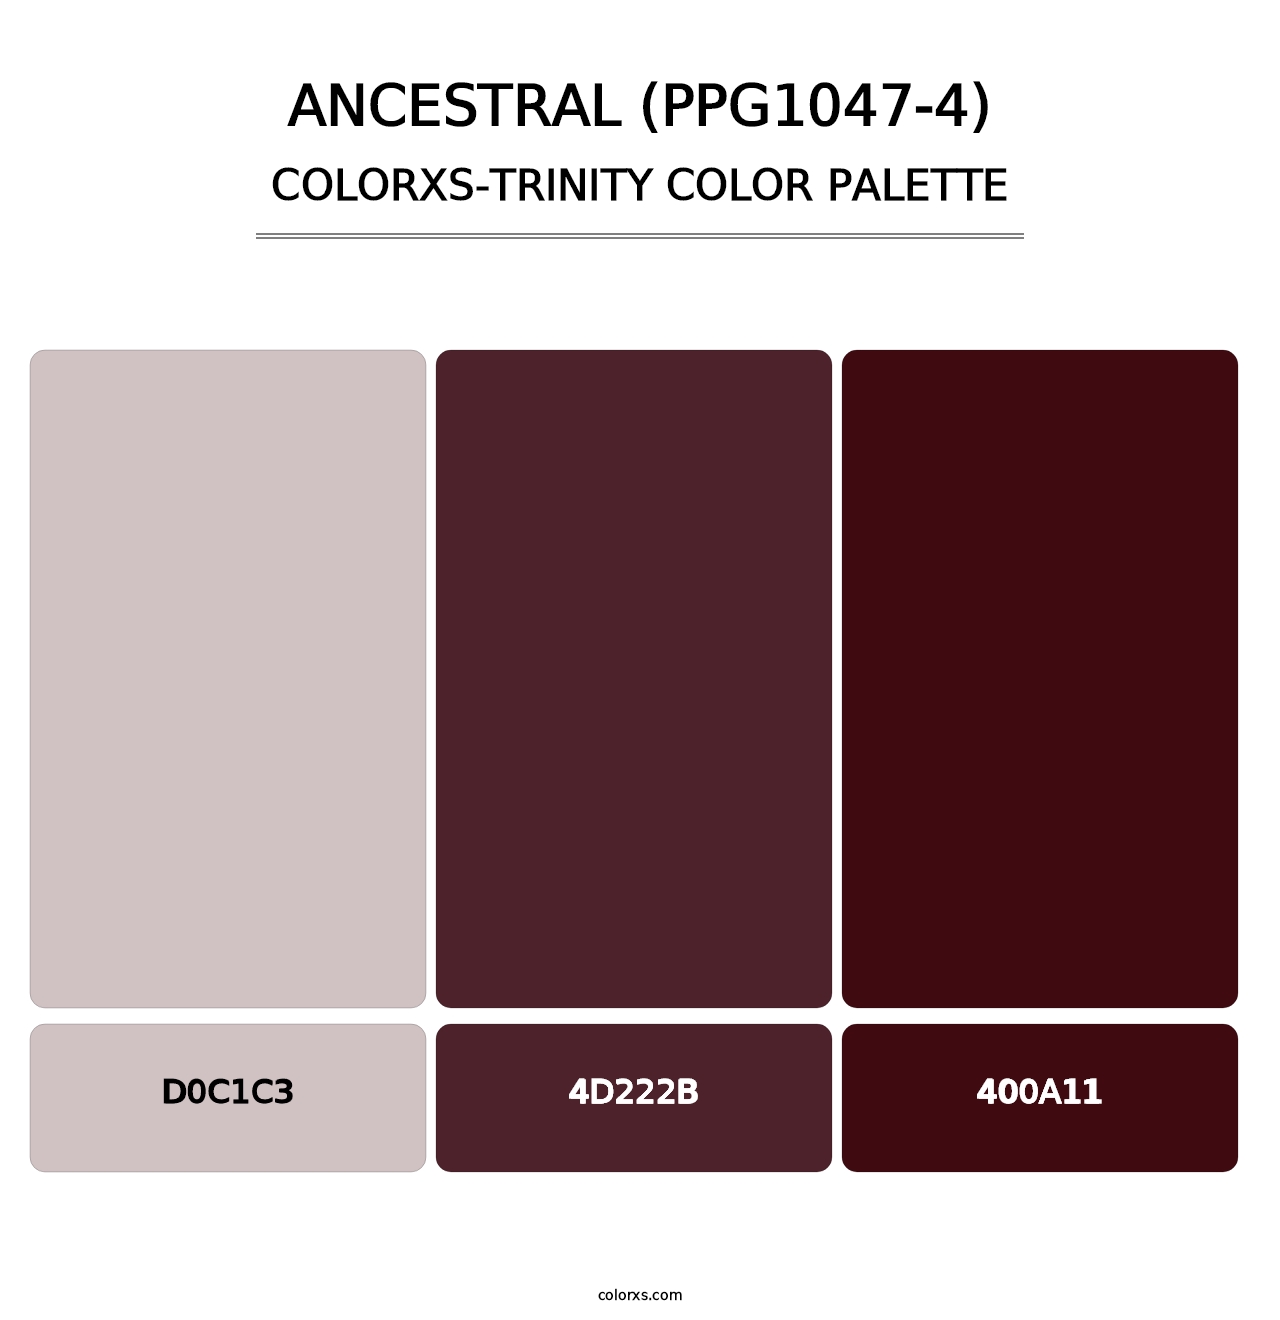 Ancestral (PPG1047-4) - Colorxs Trinity Palette